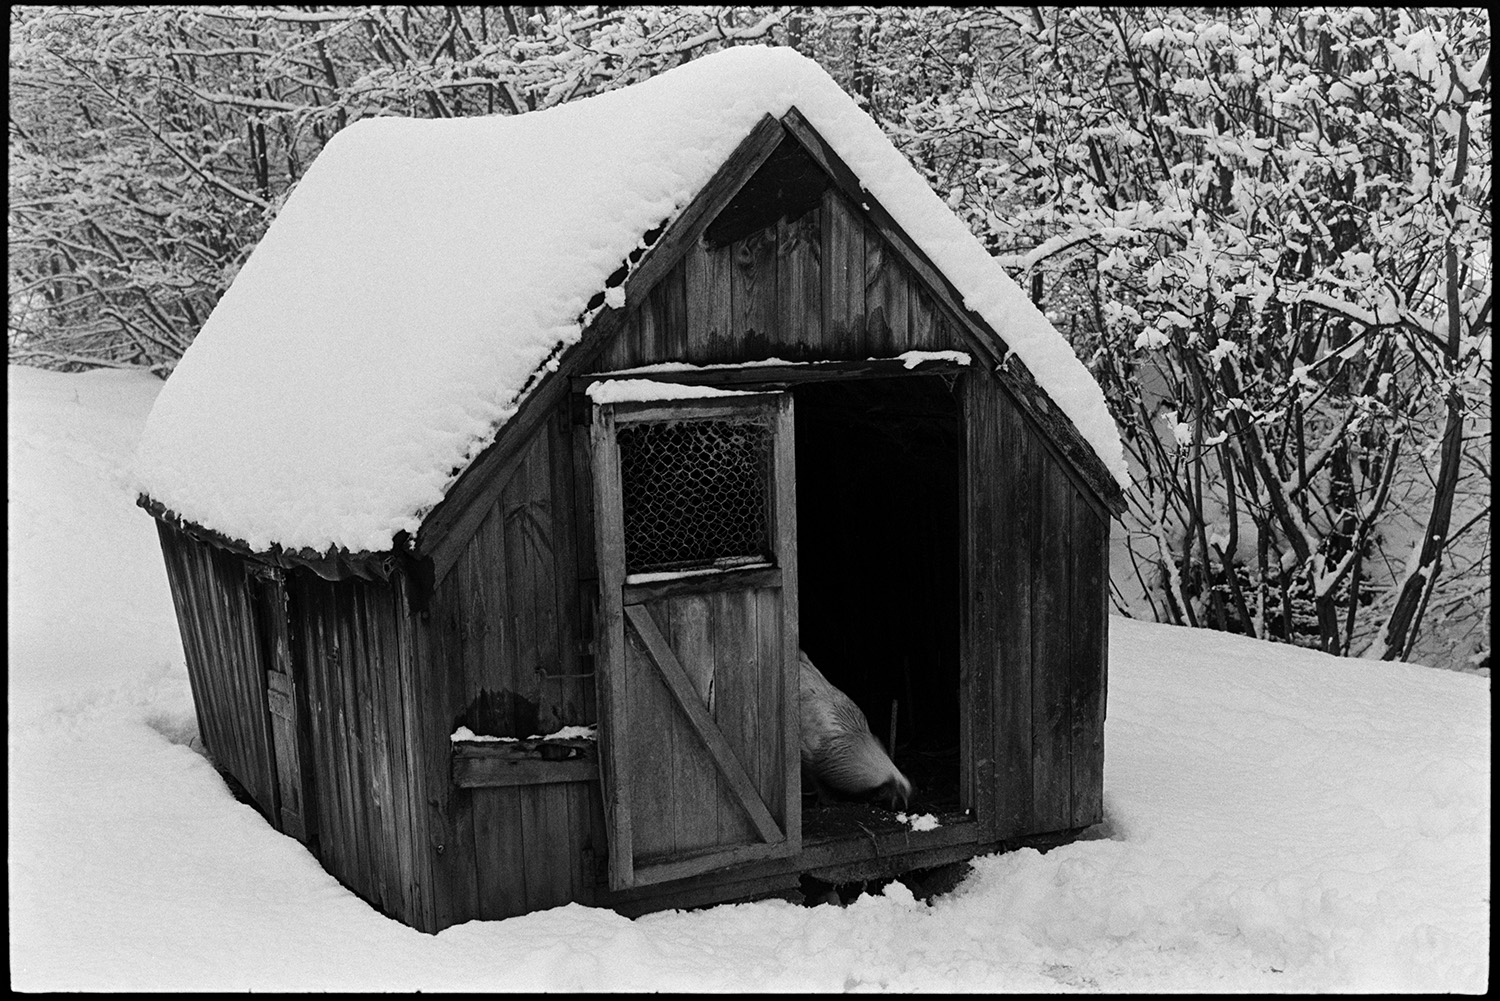 Snow, poultry house with chicken at door.
[Small poultry house covered in snow with a hen standing at the door at Millhams, Dolton. The ground and  trees in the background are covered with snow.]